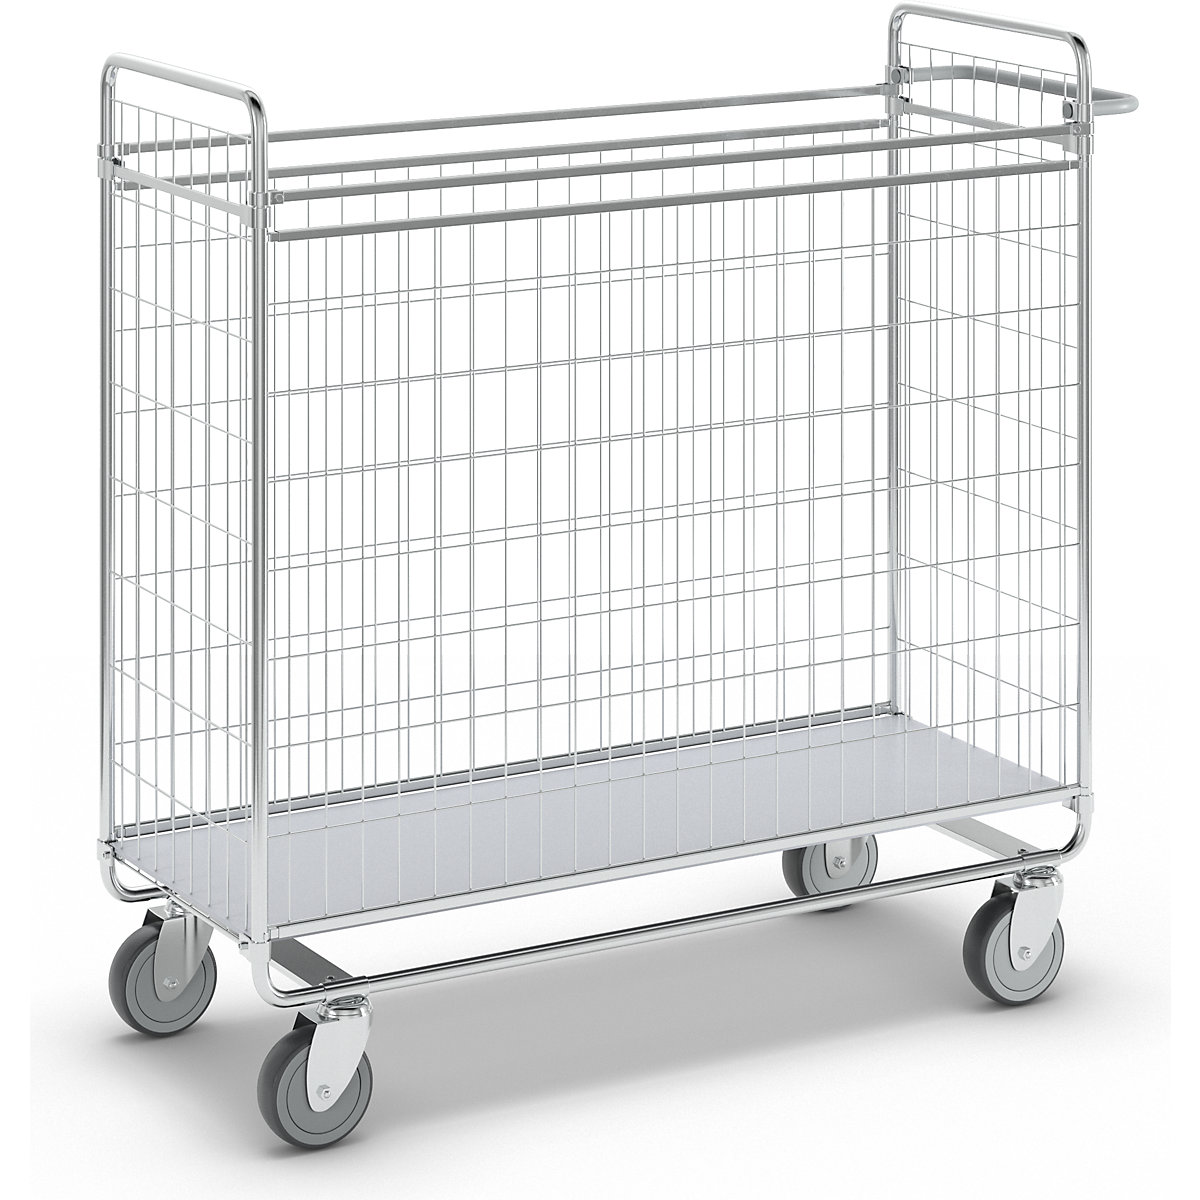 SERIES 100 four-sided trolley – HelgeNyberg, max. load 100 kg, LxWxH 1180 x 460 x 1120 mm-2